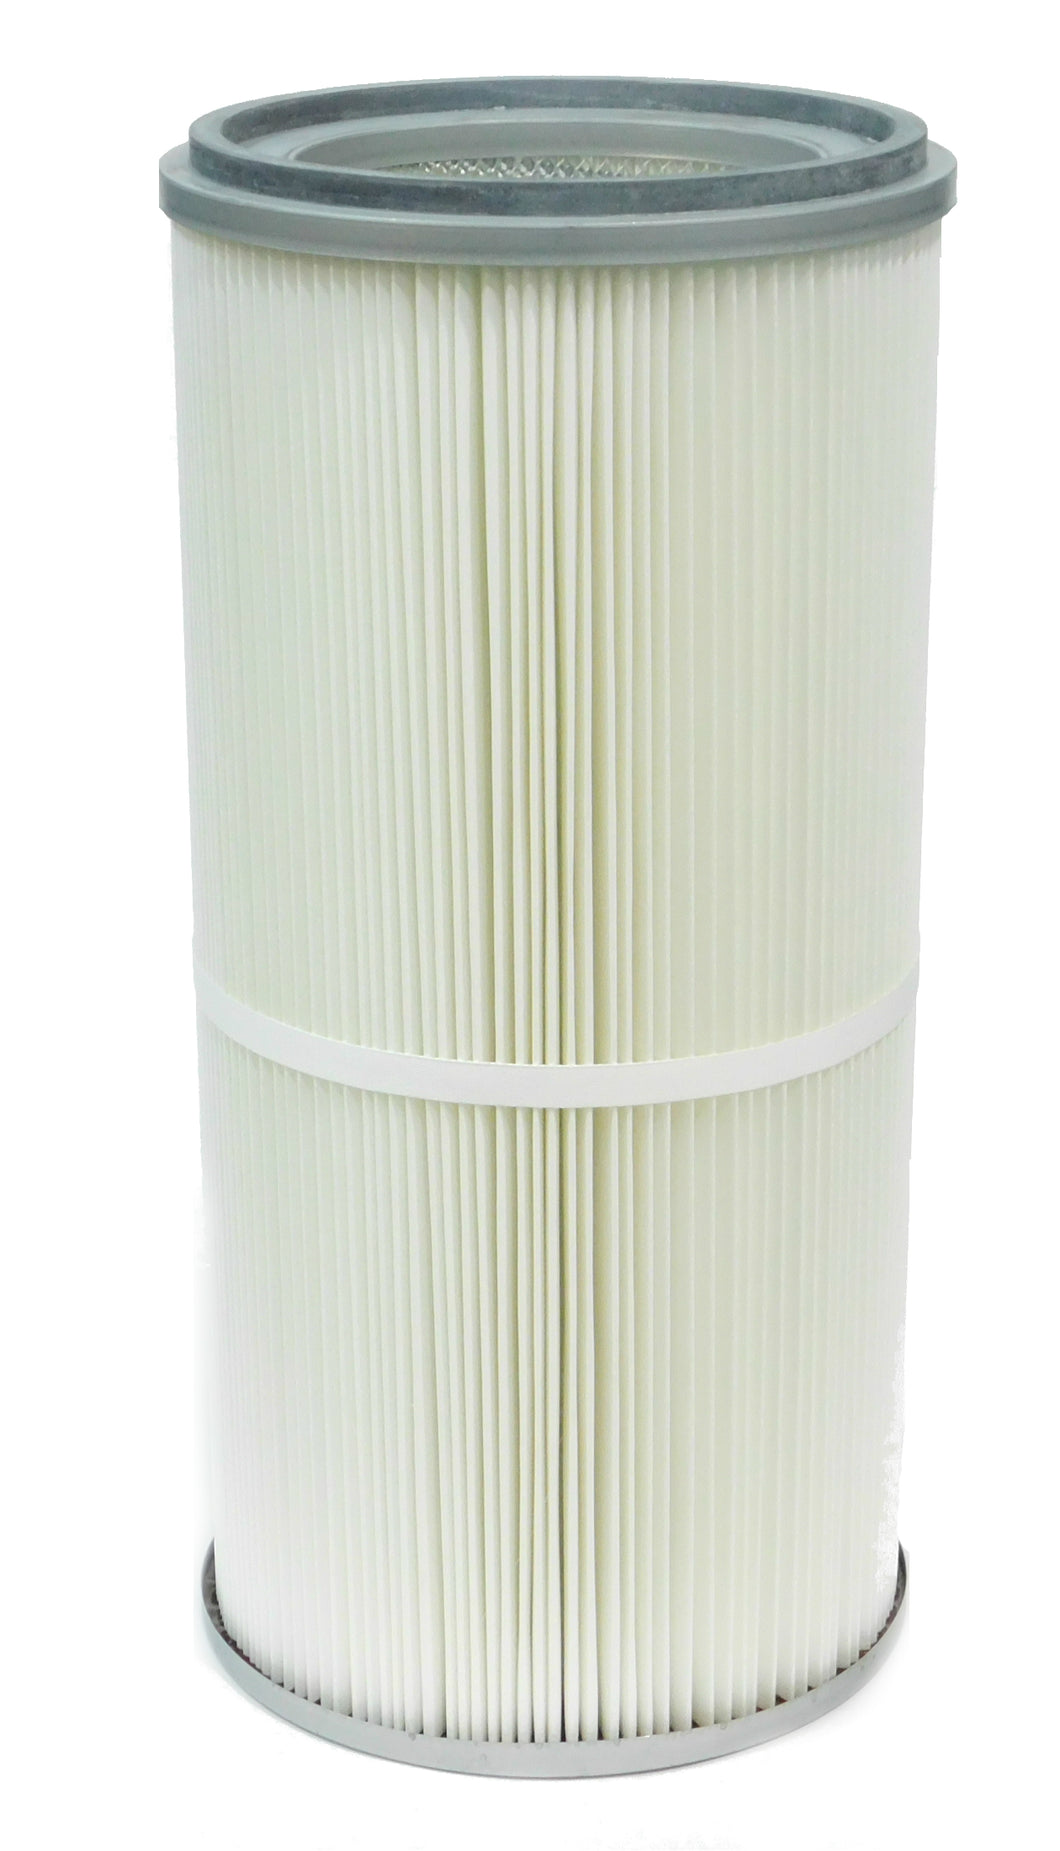 Replacement Filter for P191675 Donaldson Torit